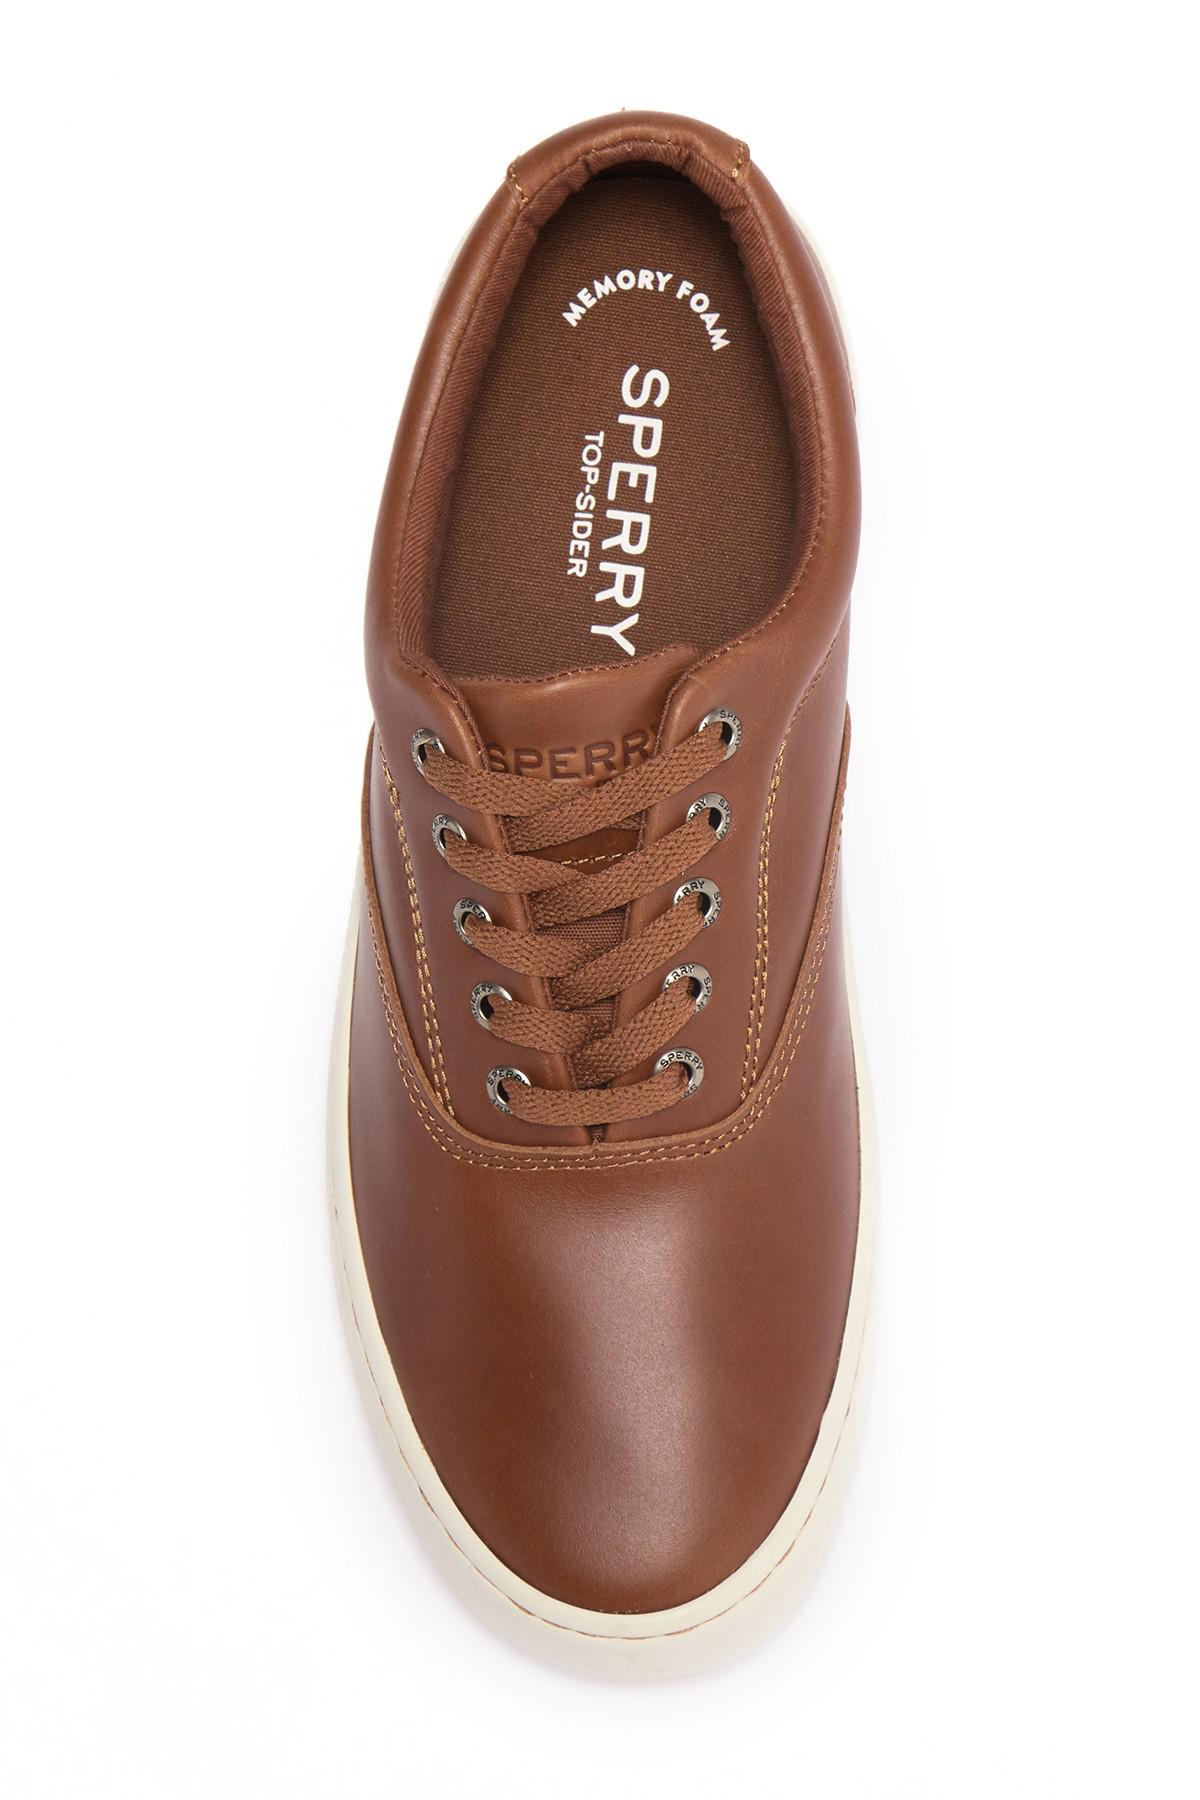 sperry cutter cvo leather sneaker